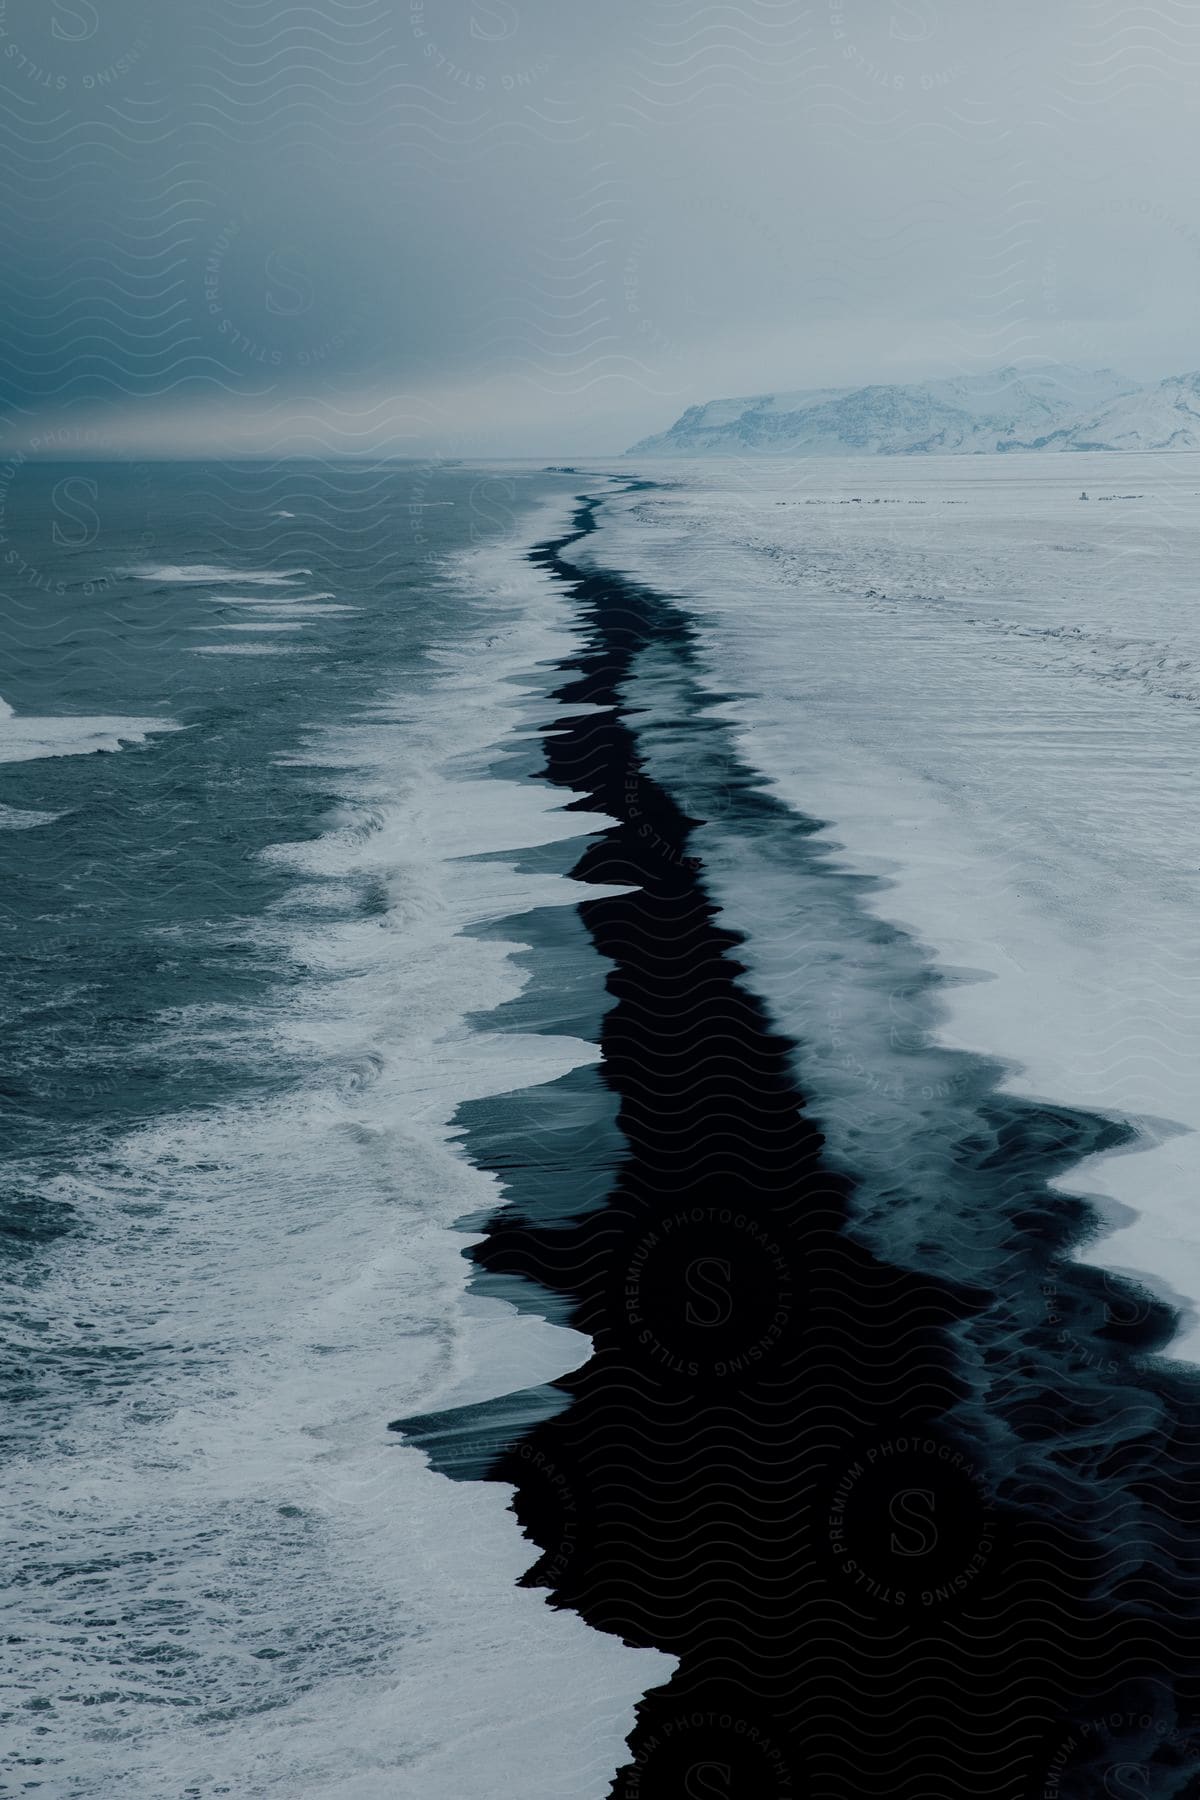 Waves crash on an icy shore with mountains in the background